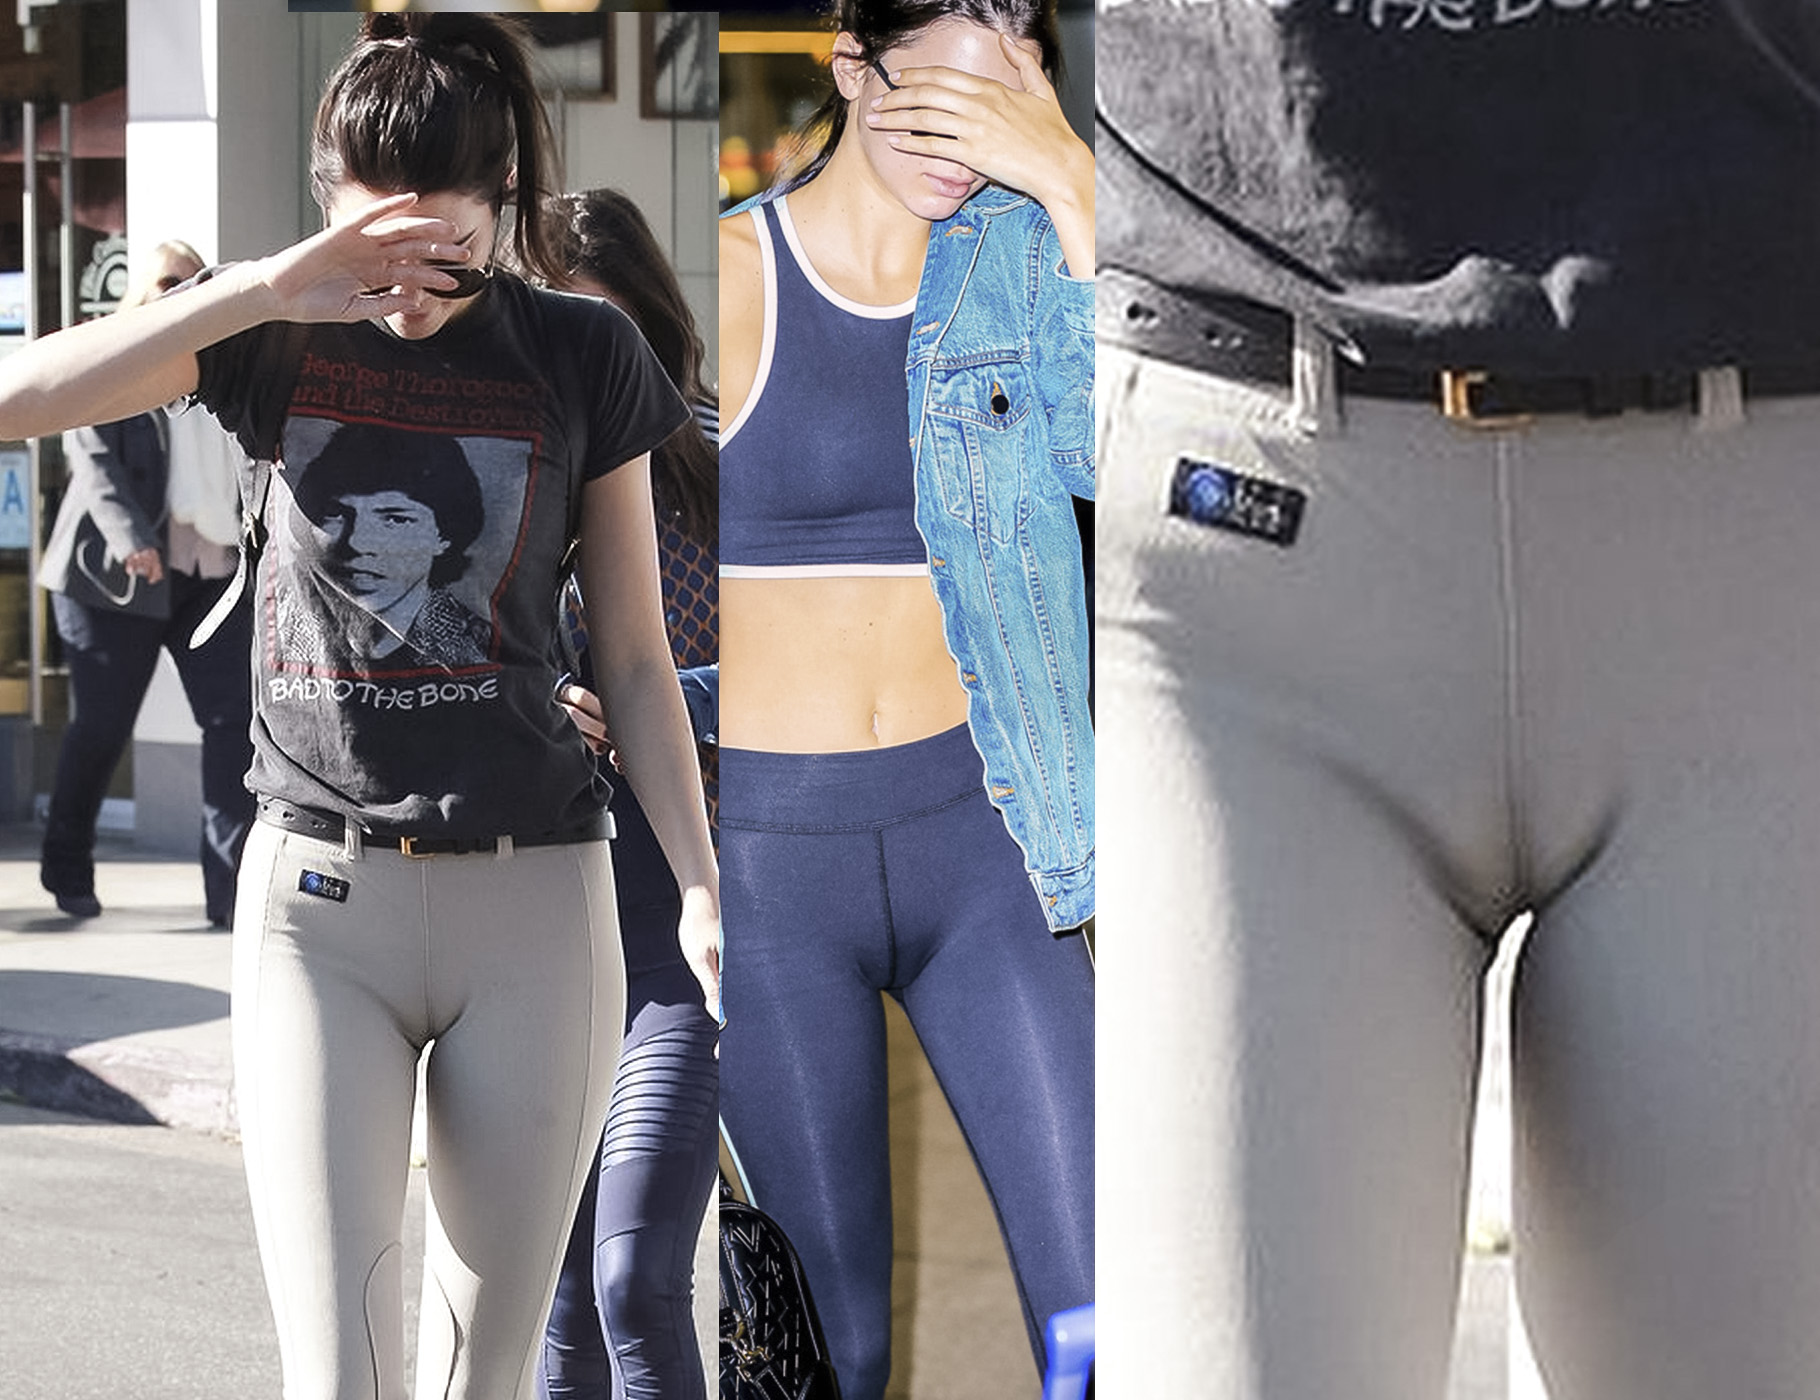 autumn sheets recommends Kendall Jenner Cameltoe